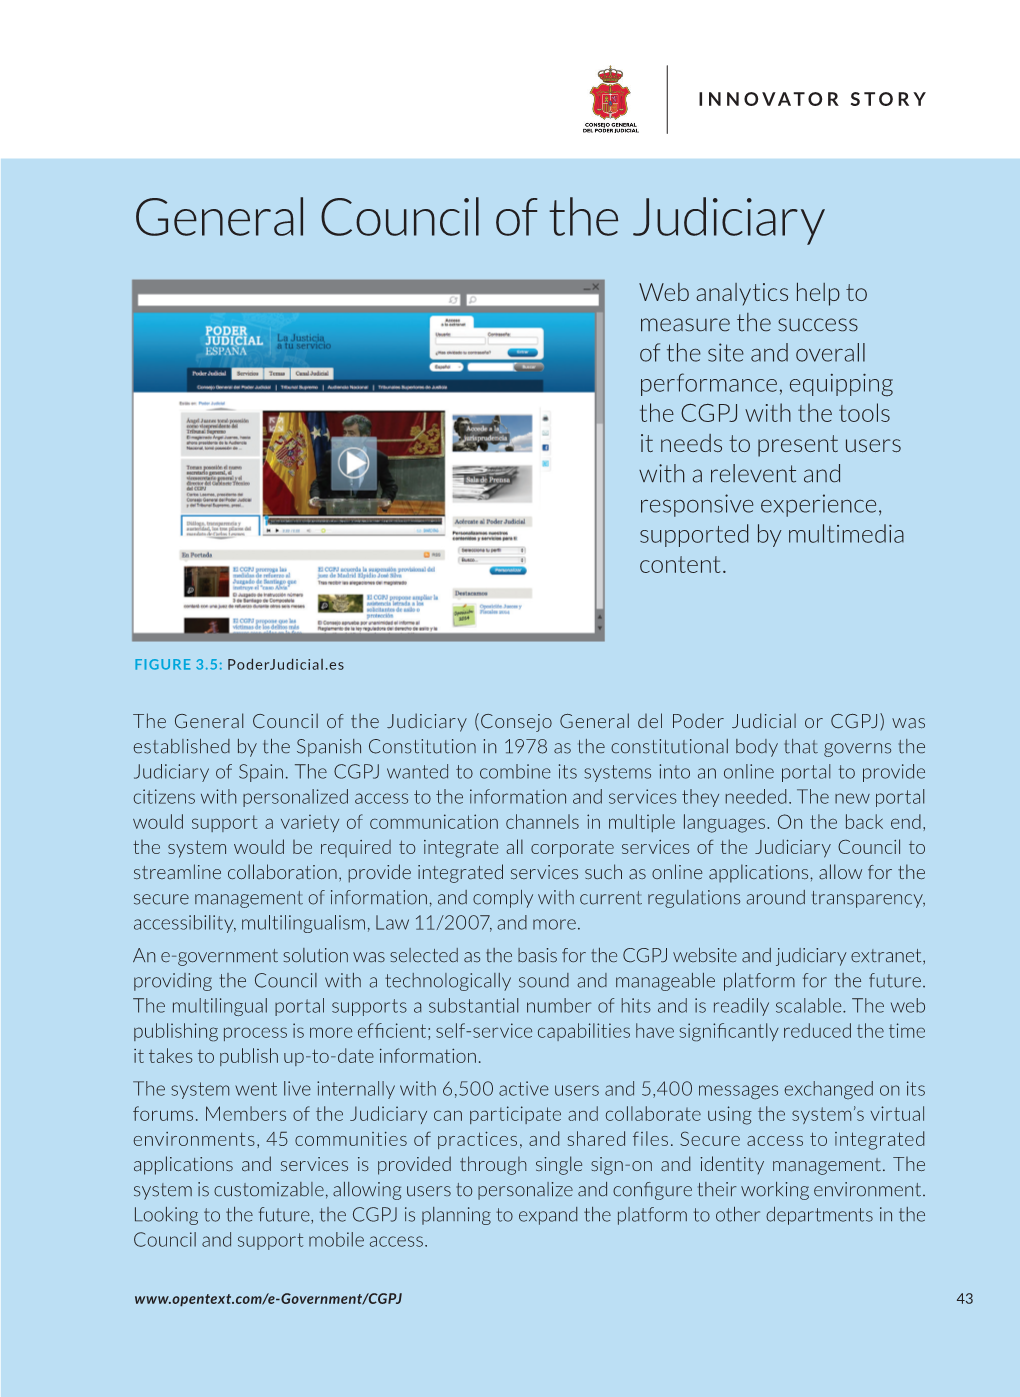 General Council of the Judiciary